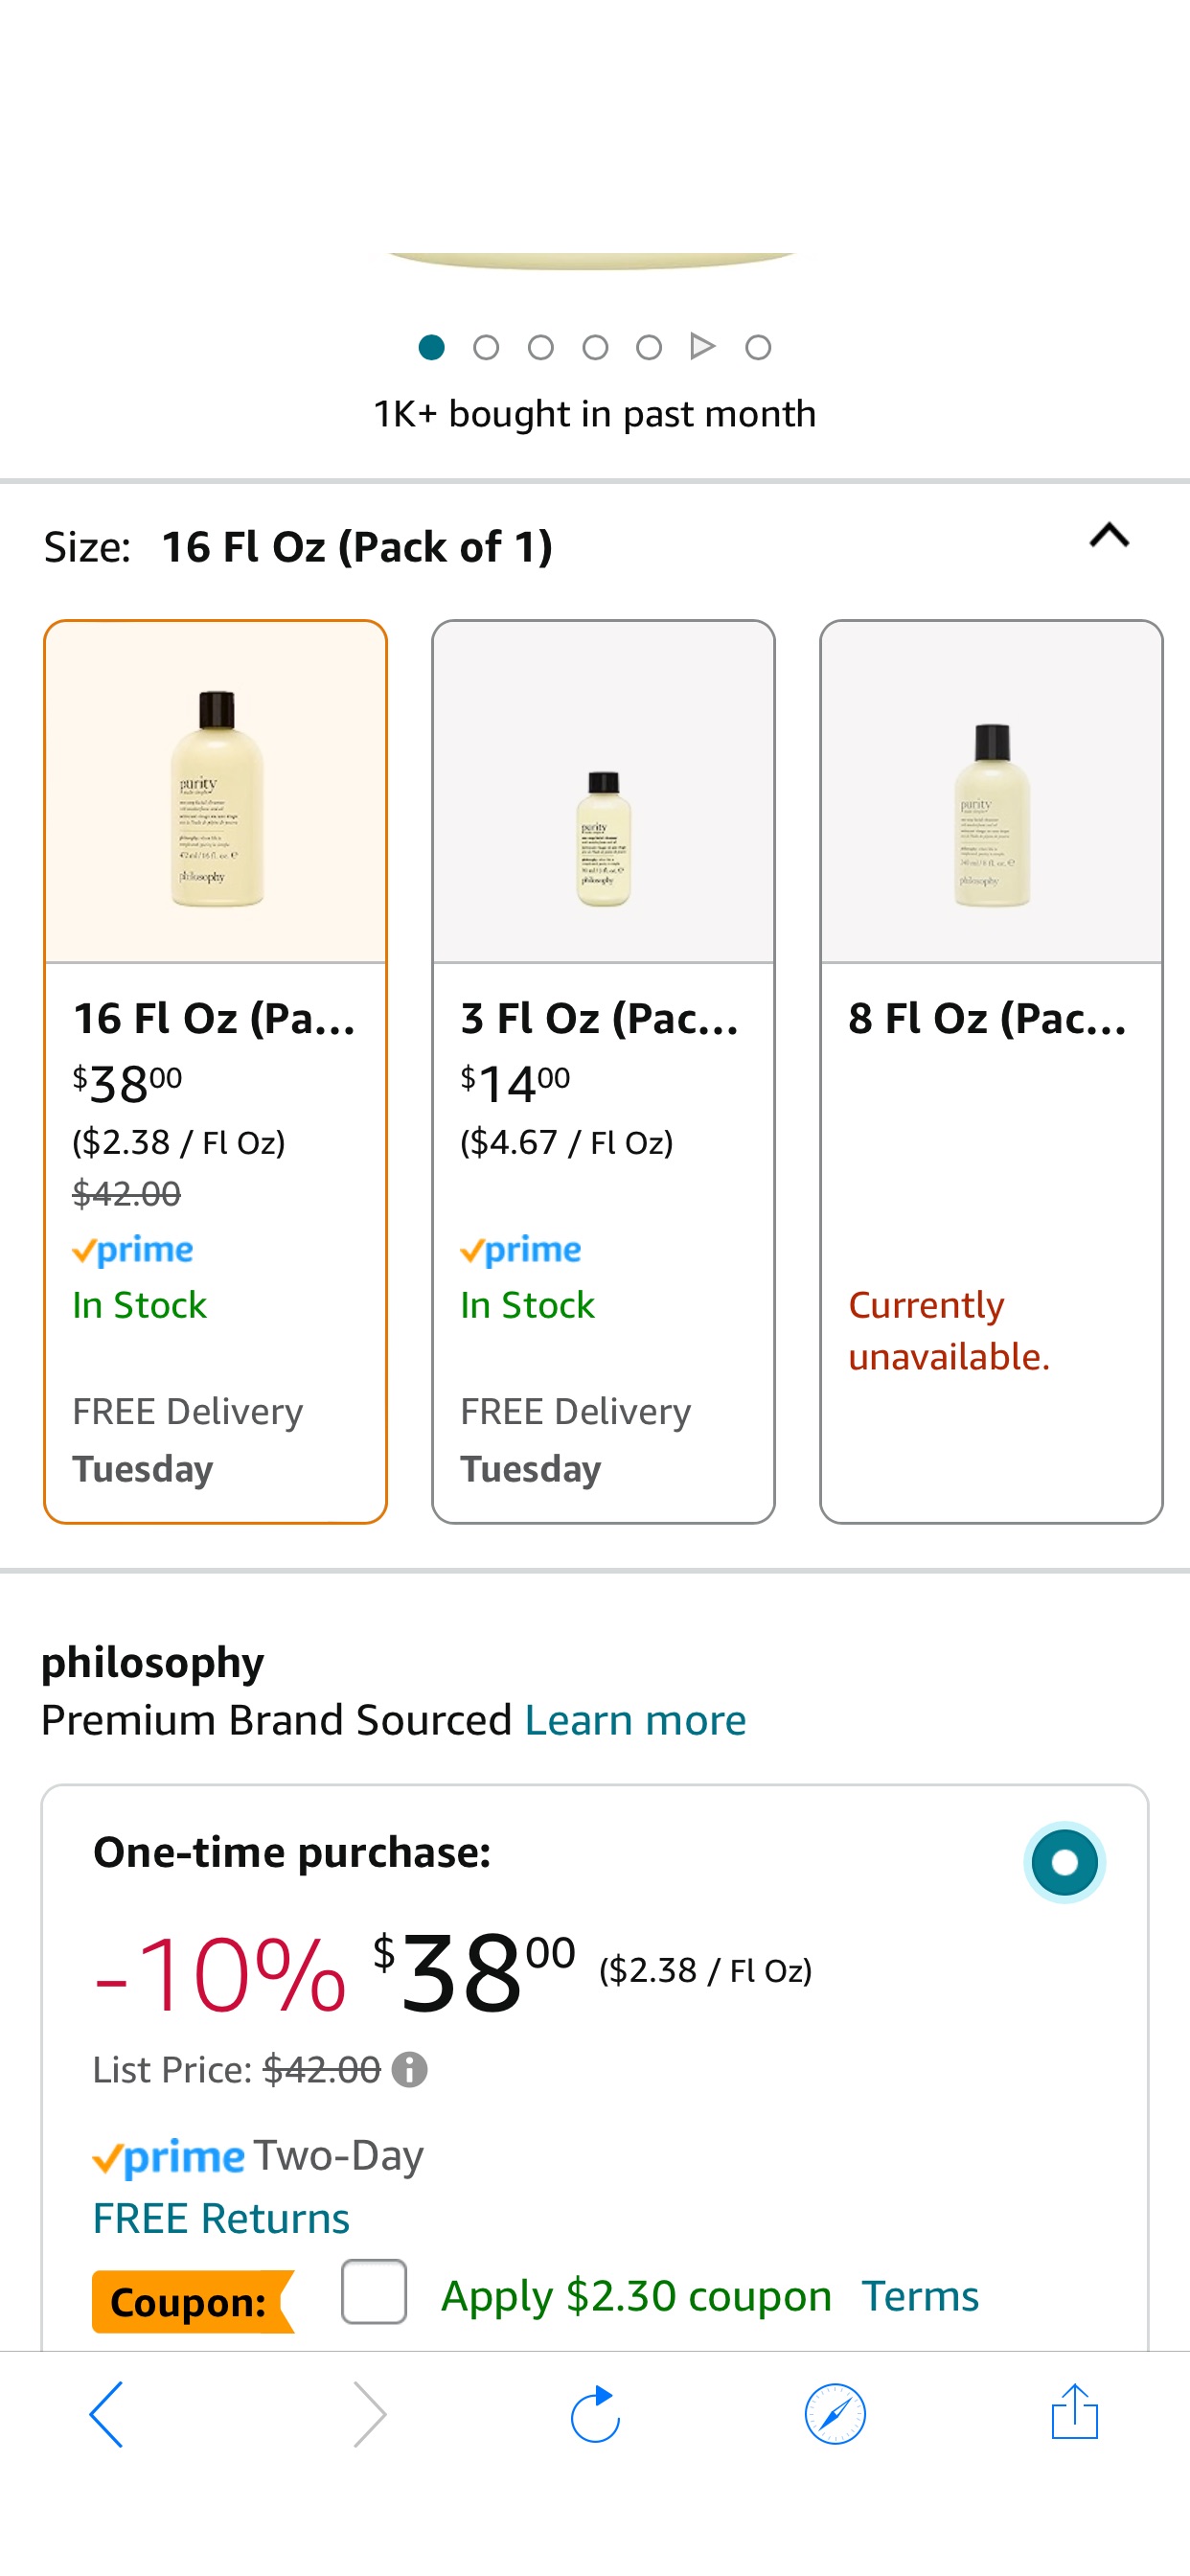 Amazon.com: philosophy Purity Made Simple One-Step Facial Cleanser, 16 Fl. Oz. : Beauty & Personal Care 洗面奶